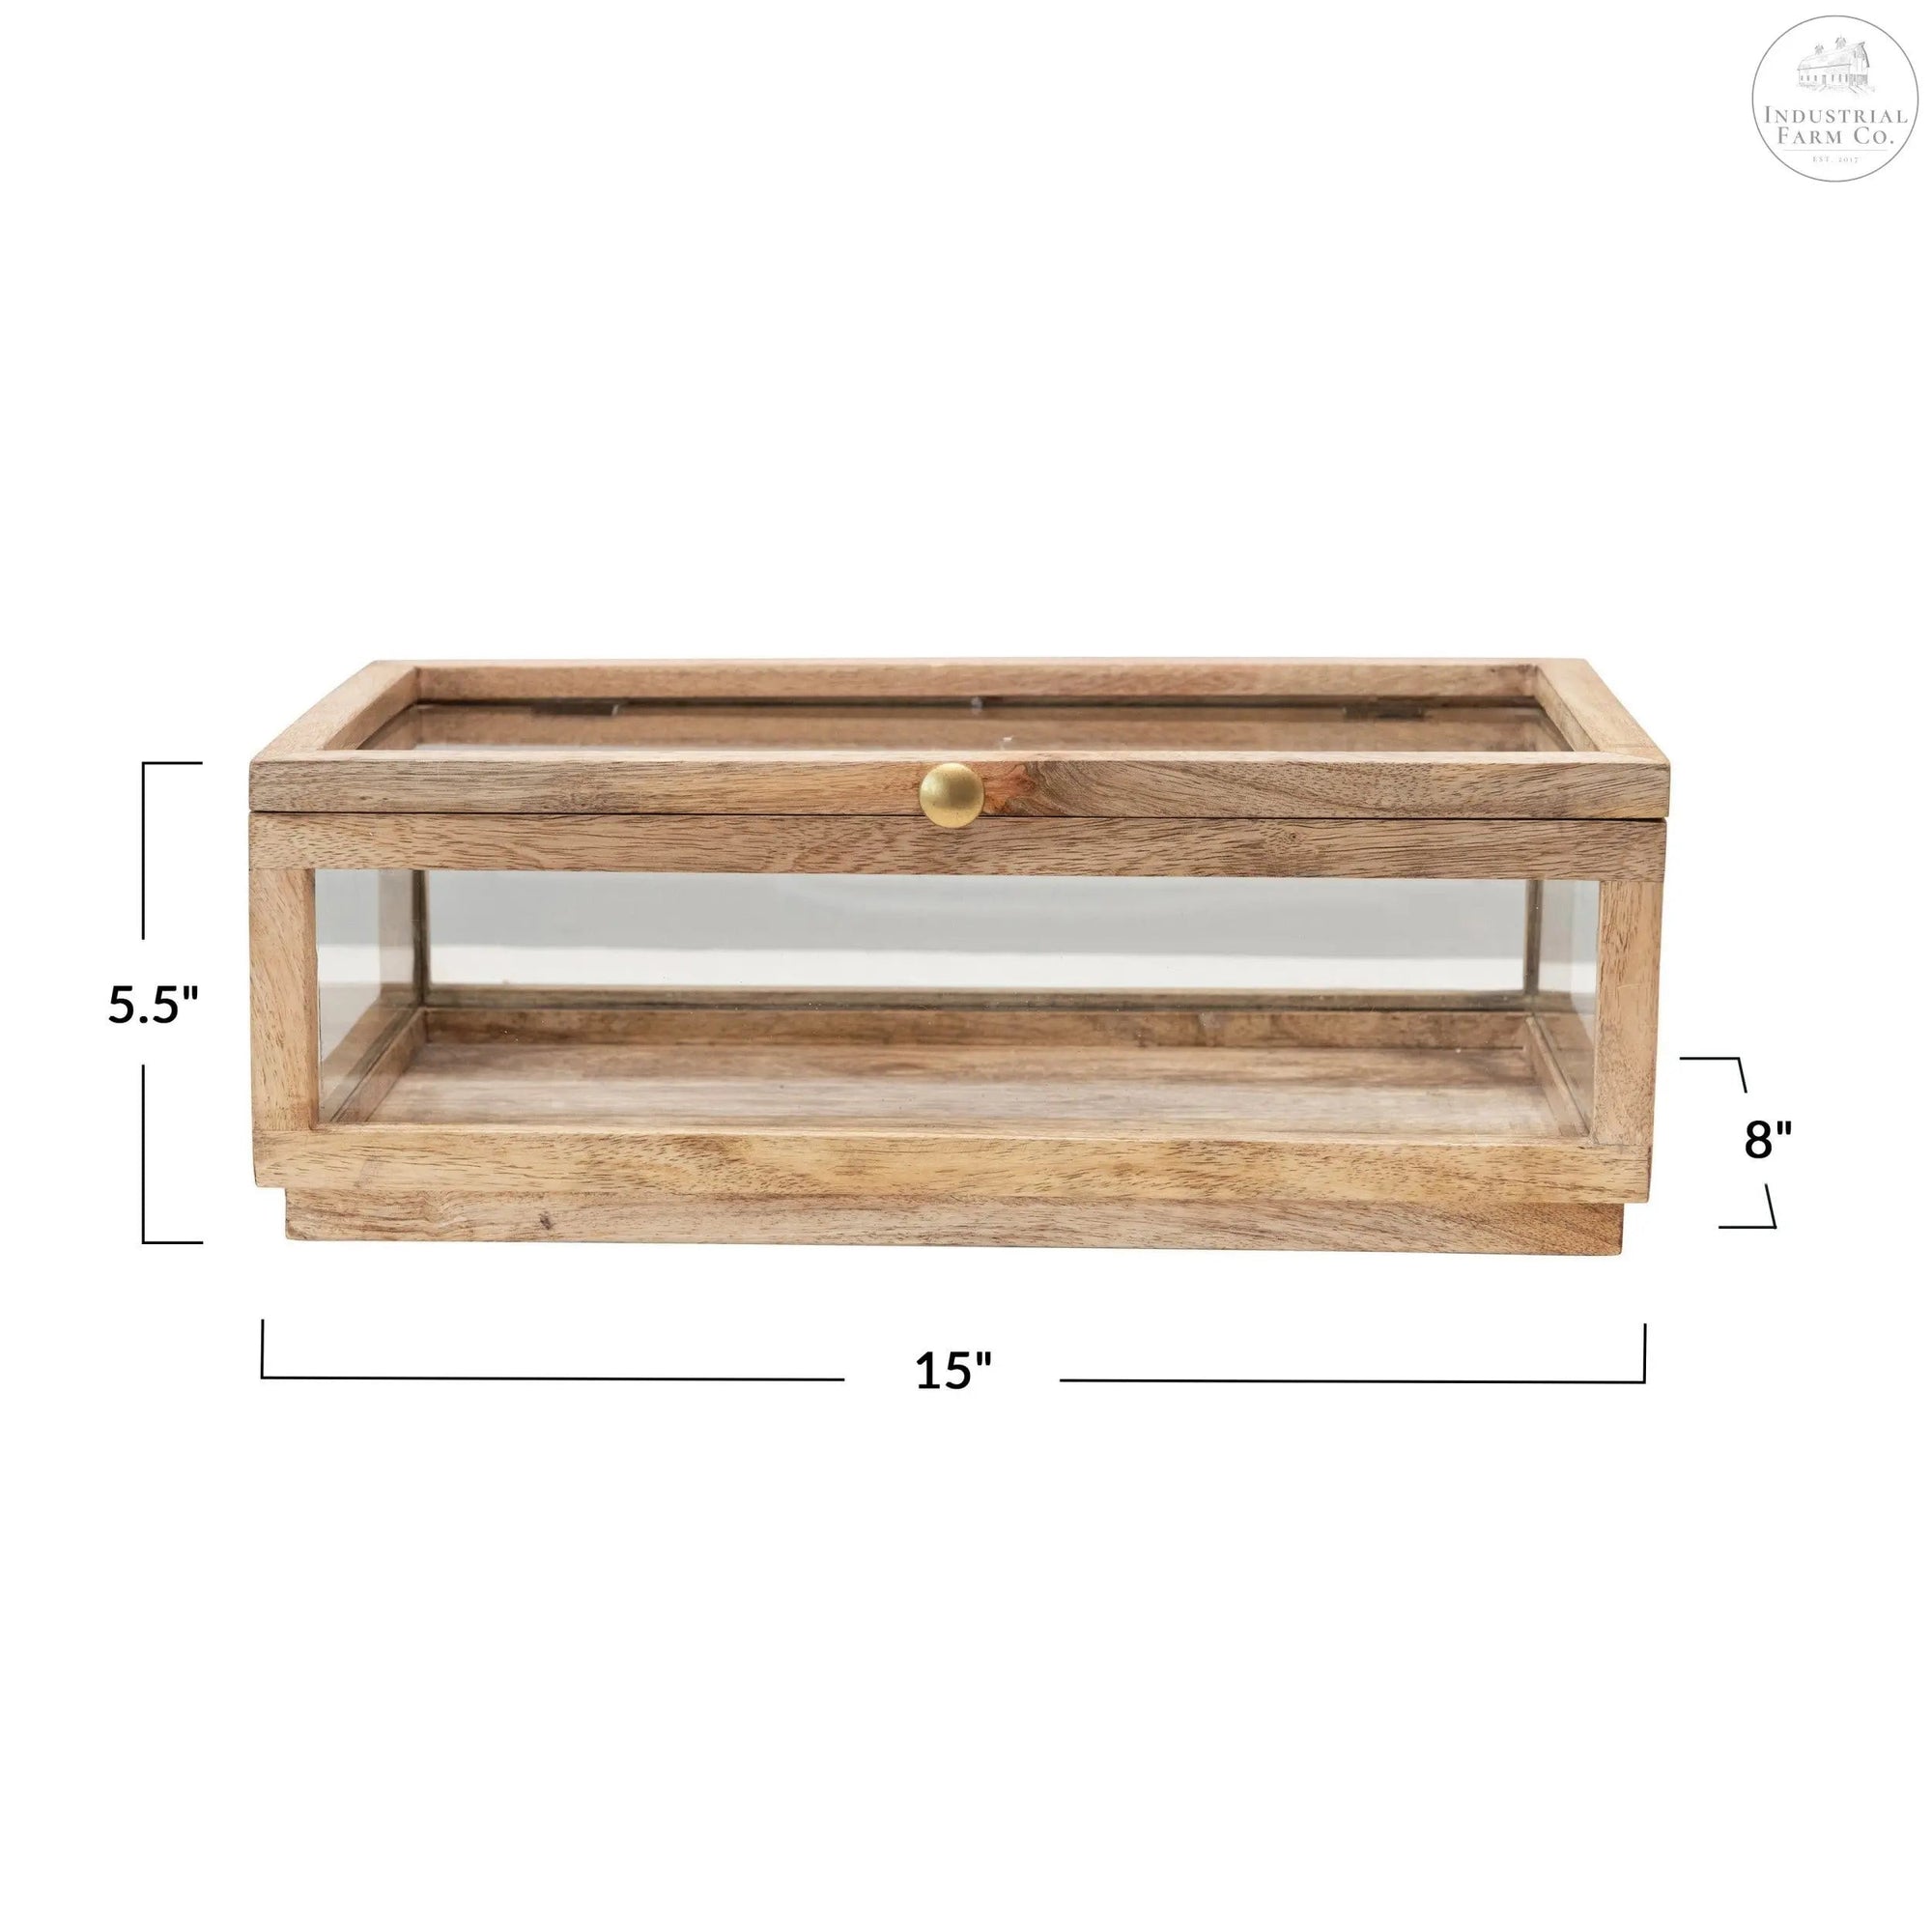 Natural Collection Wooden Decorative Display Box     | Industrial Farm Co